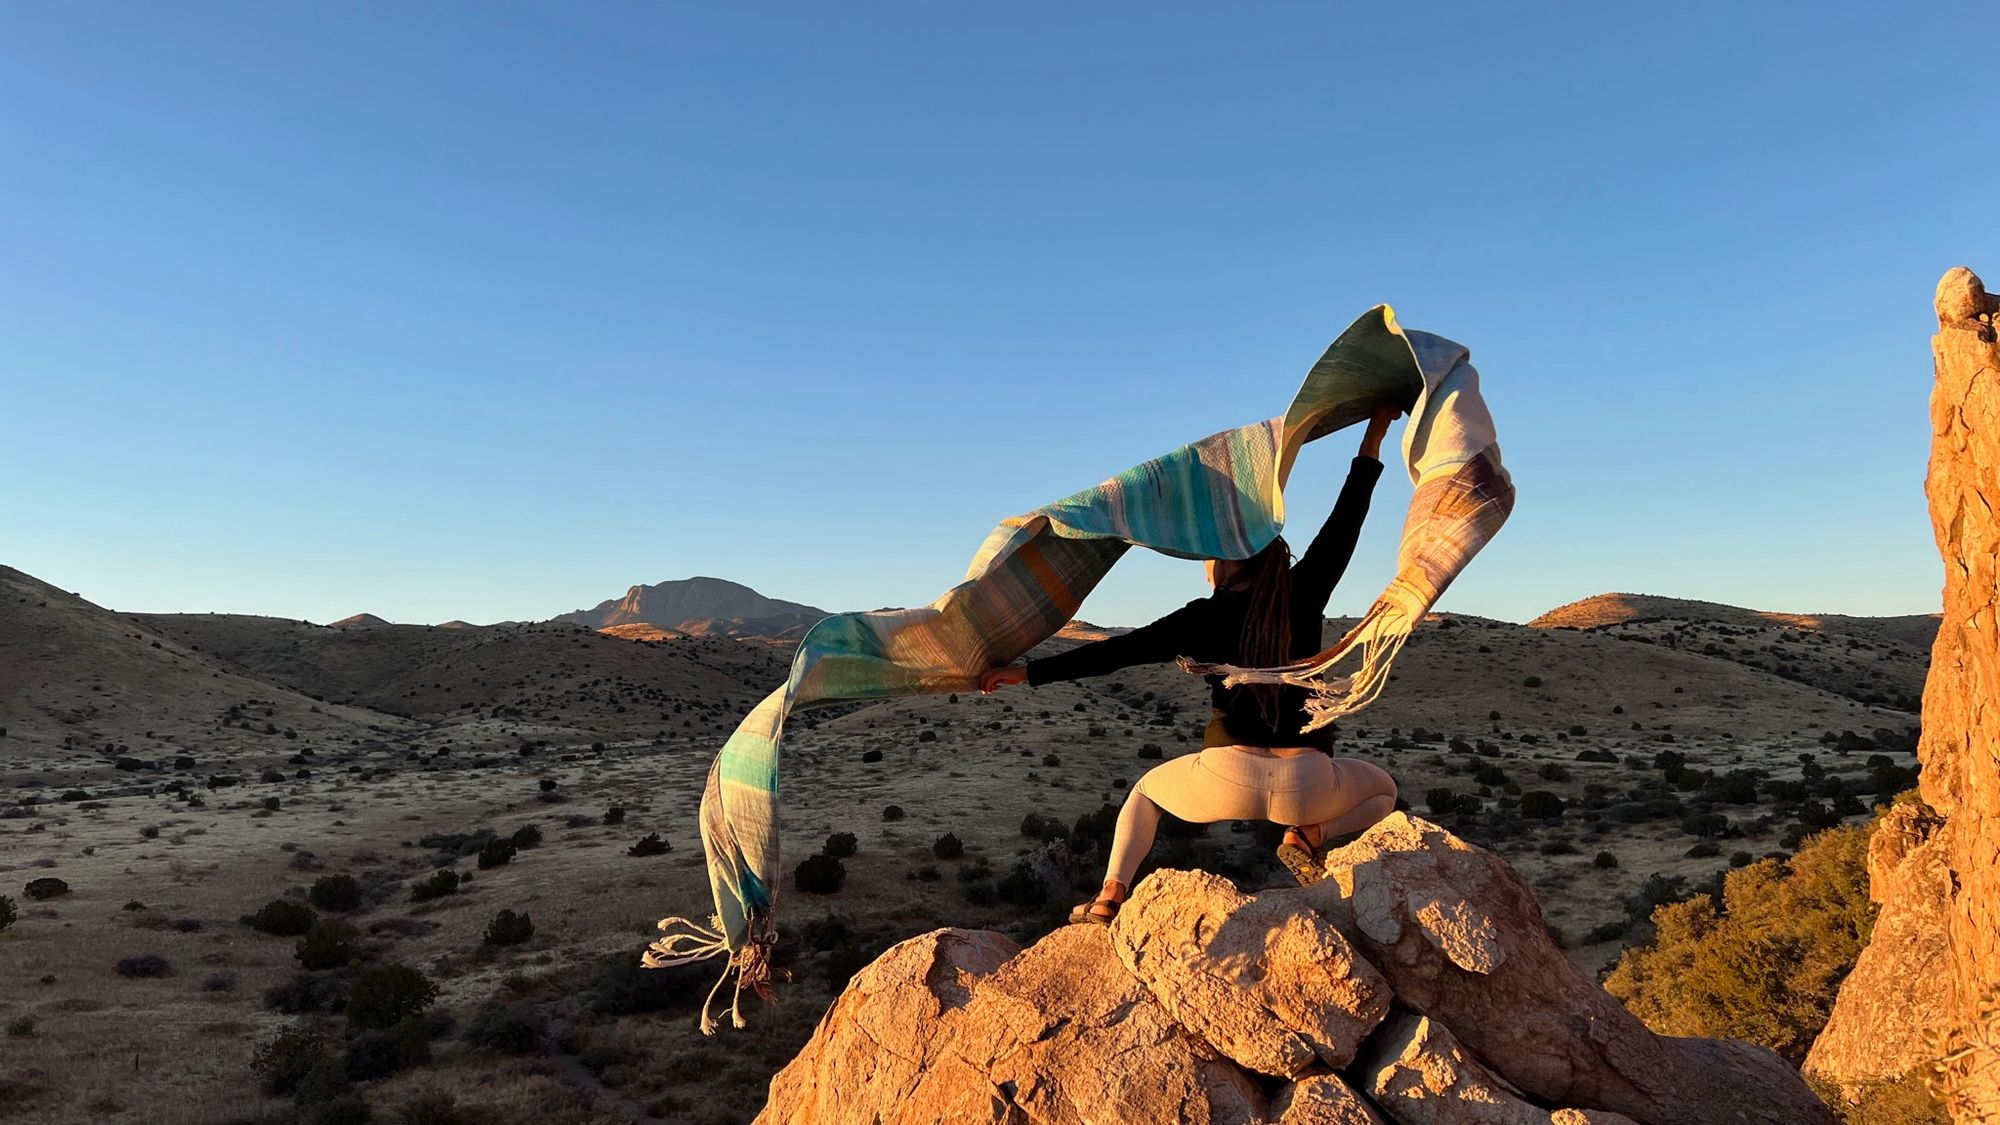 Woman standing on a cliff-top in desert mountain landscape at sunset, she is holding blue fabric which is blowing in the wind